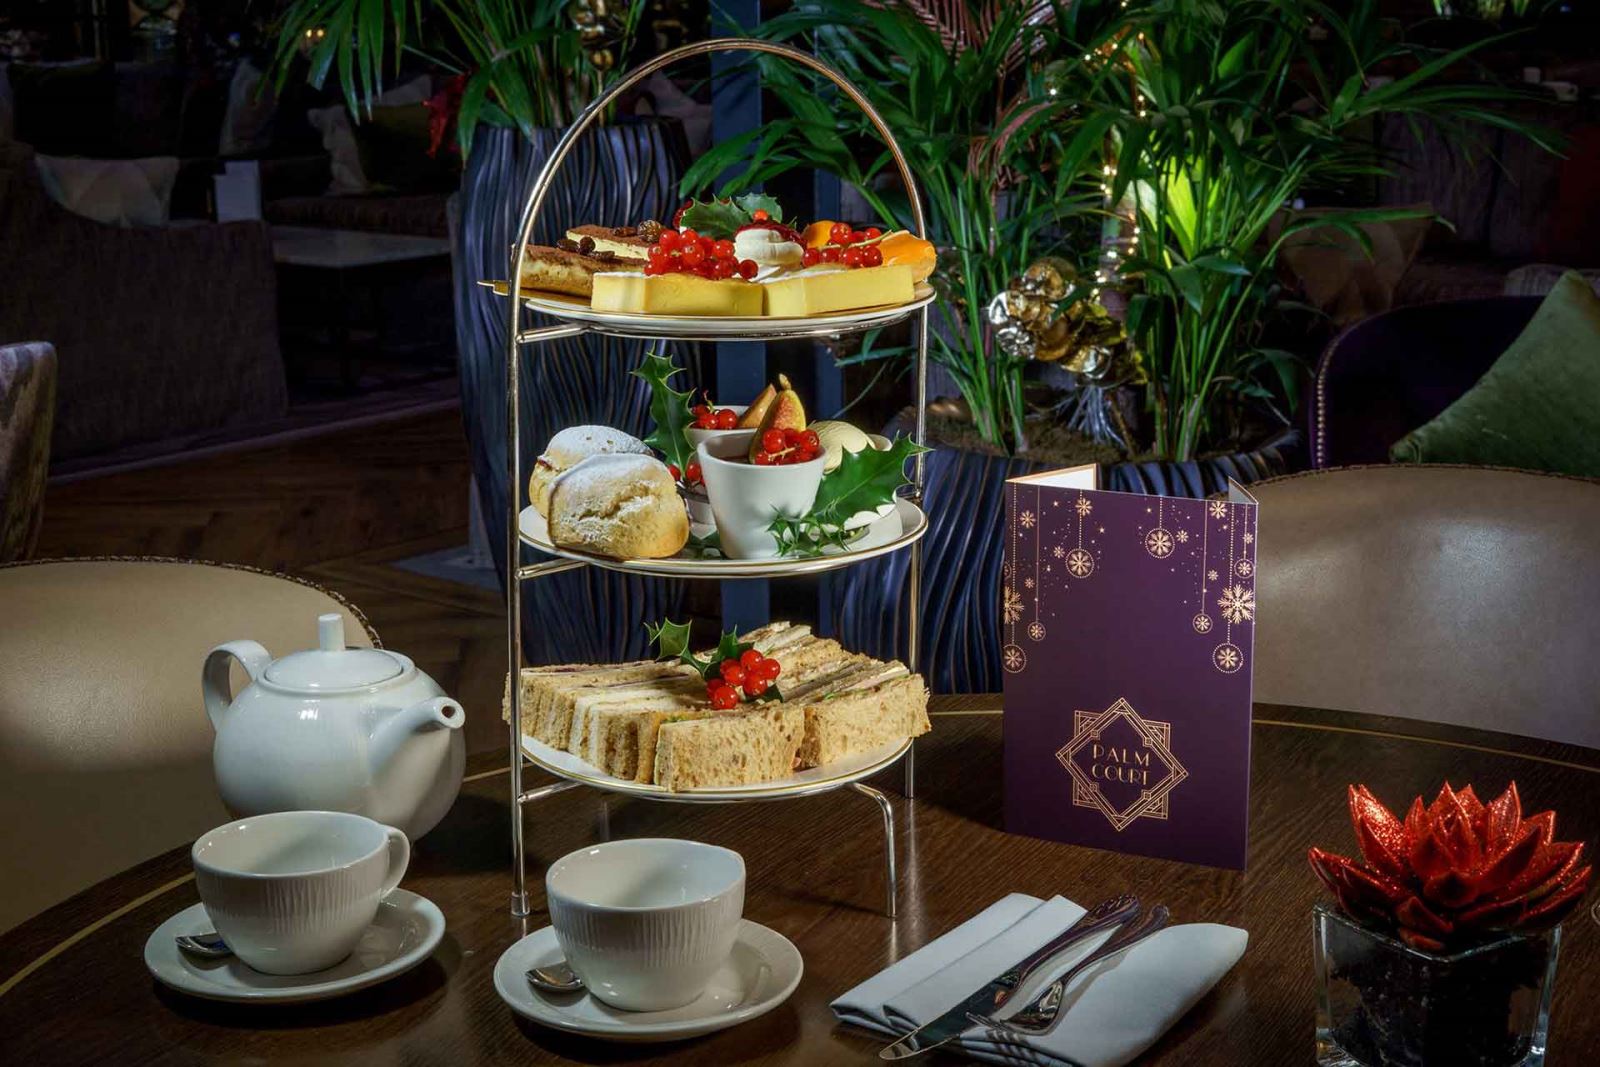 Festive Afternoon Tea at the Grosvenor Pulford